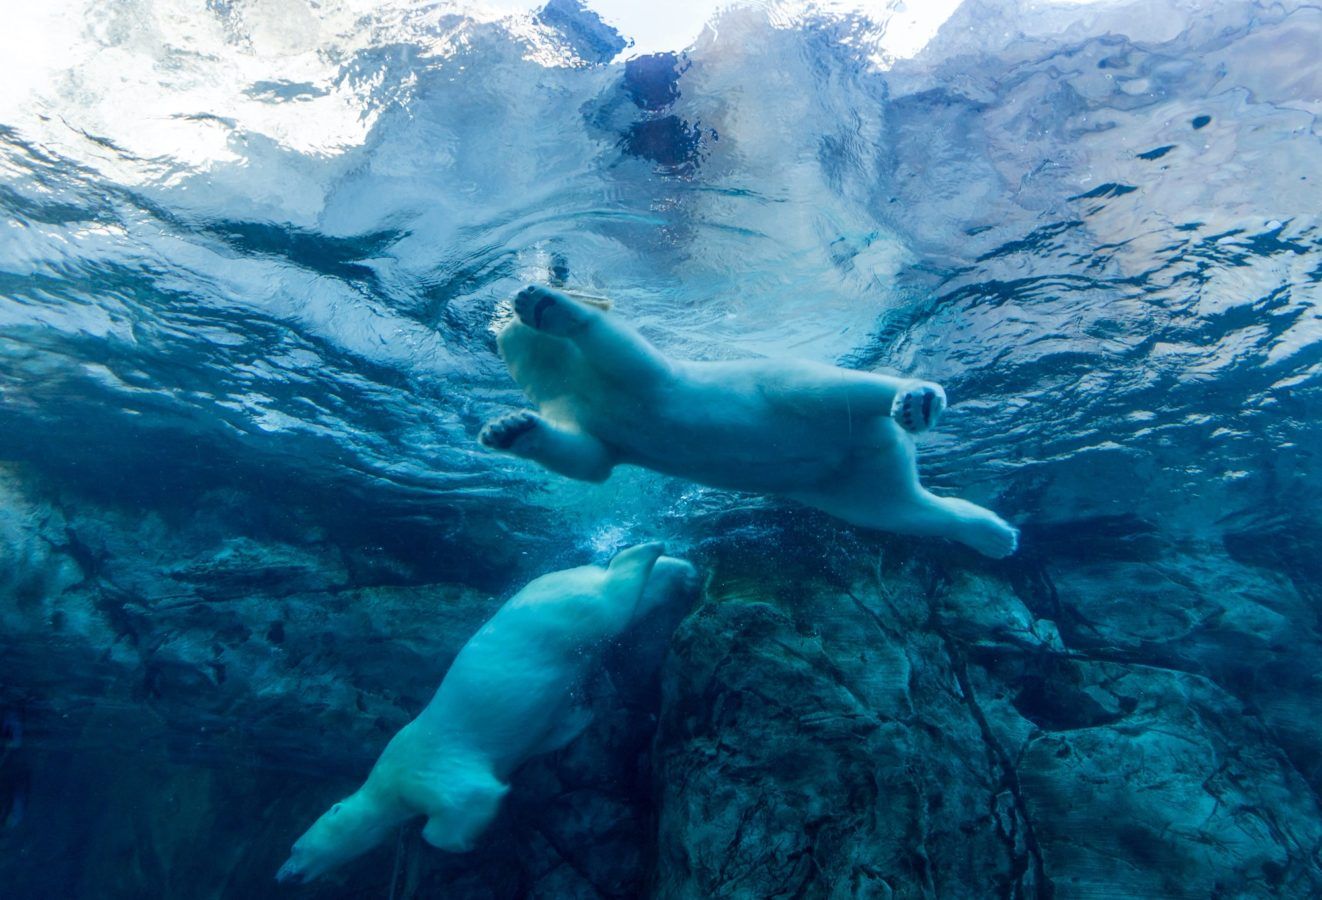 Climate change: Polar bears could face extinction by 2100